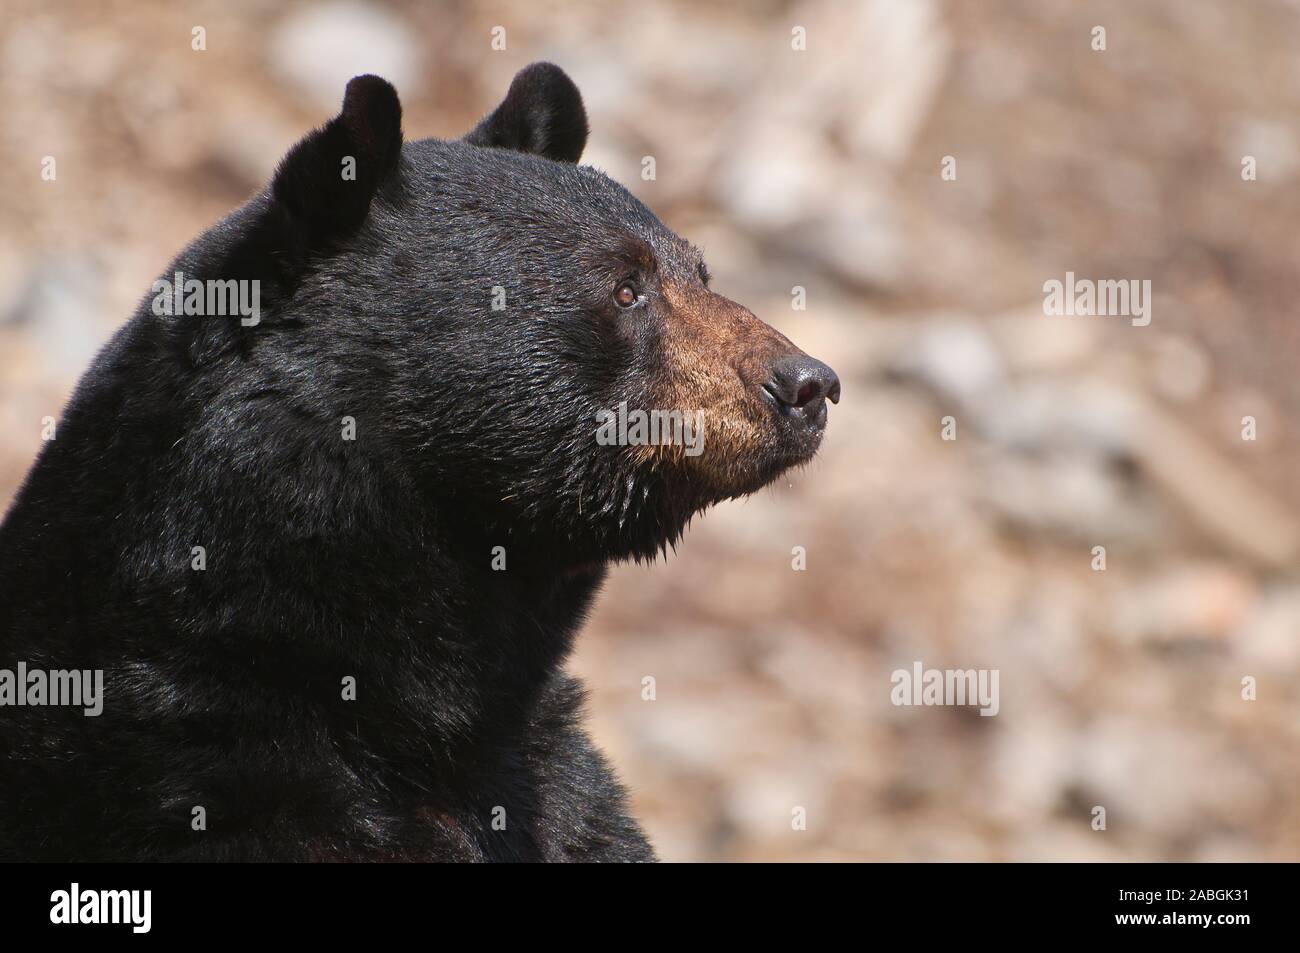 Adult Black Bear portrait, looking right. Stock Photo